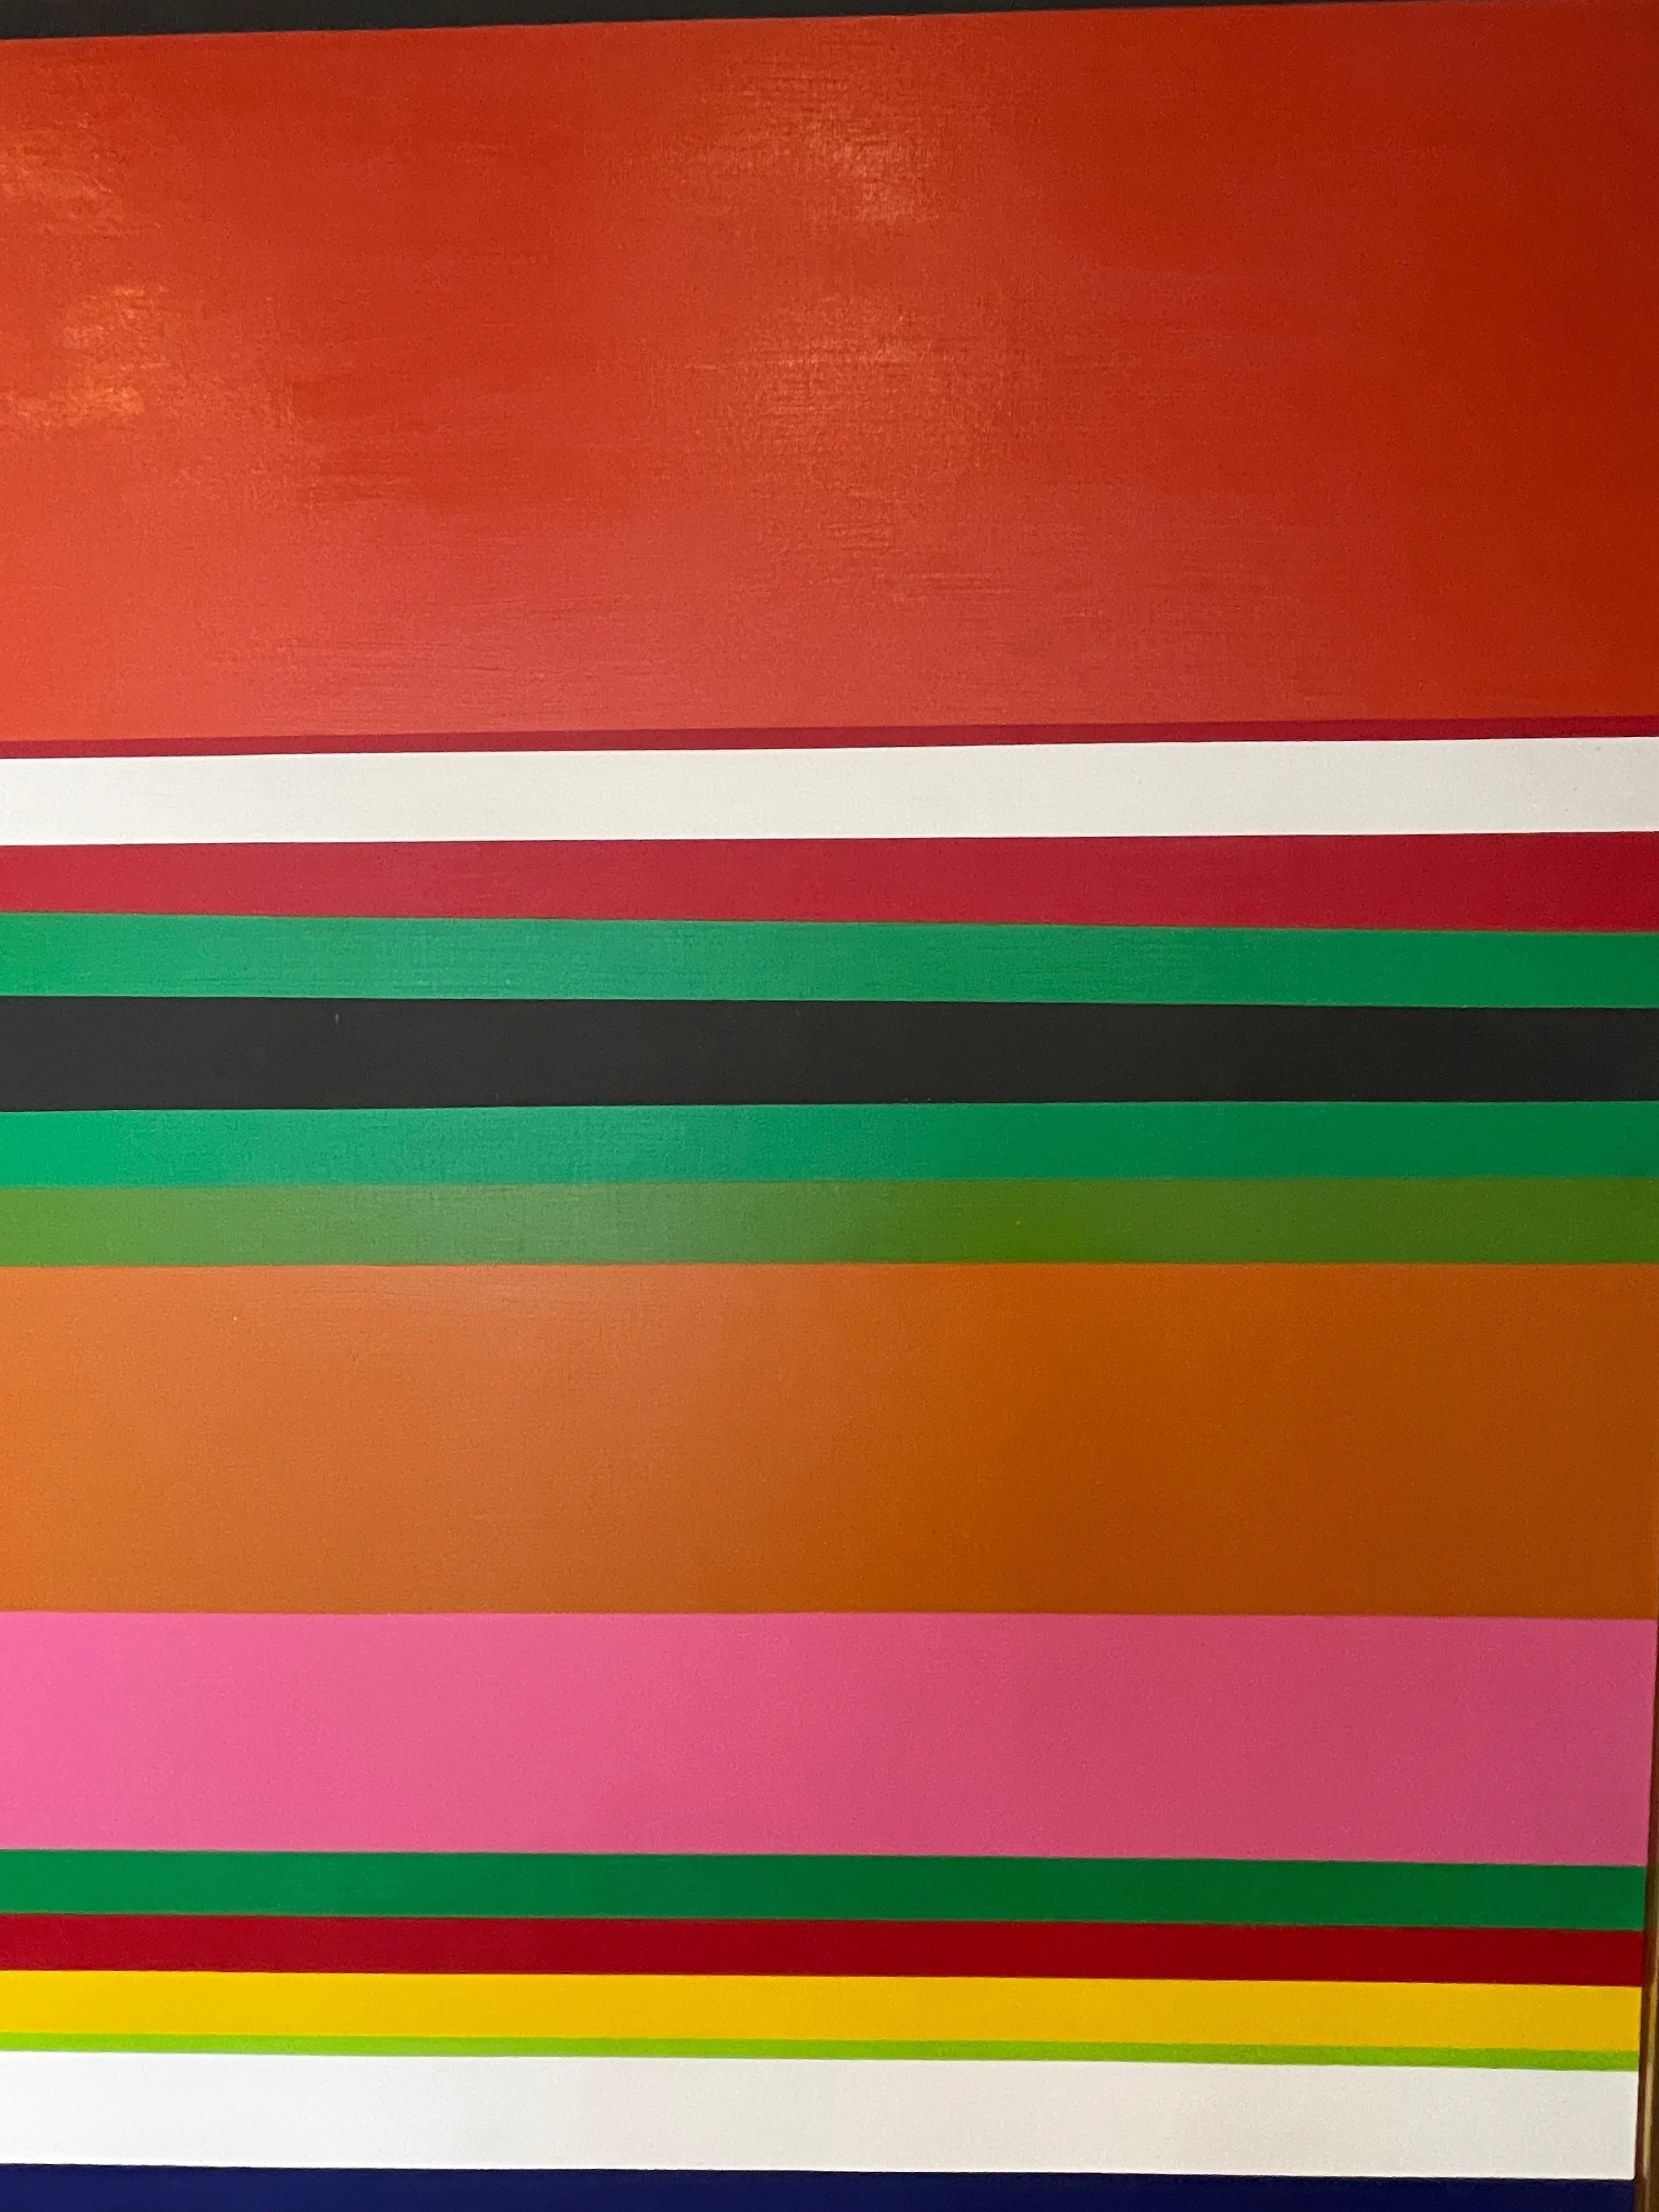 Jay Rosenblum (1933 - 1989)
Untitled, 1973
Acrylic on canvas
54 x 128 inches
Signed twice and dated on the reverse

Provenance:
Private Collection, Long Island

Jay Rosenblum experimented with different versions of the 